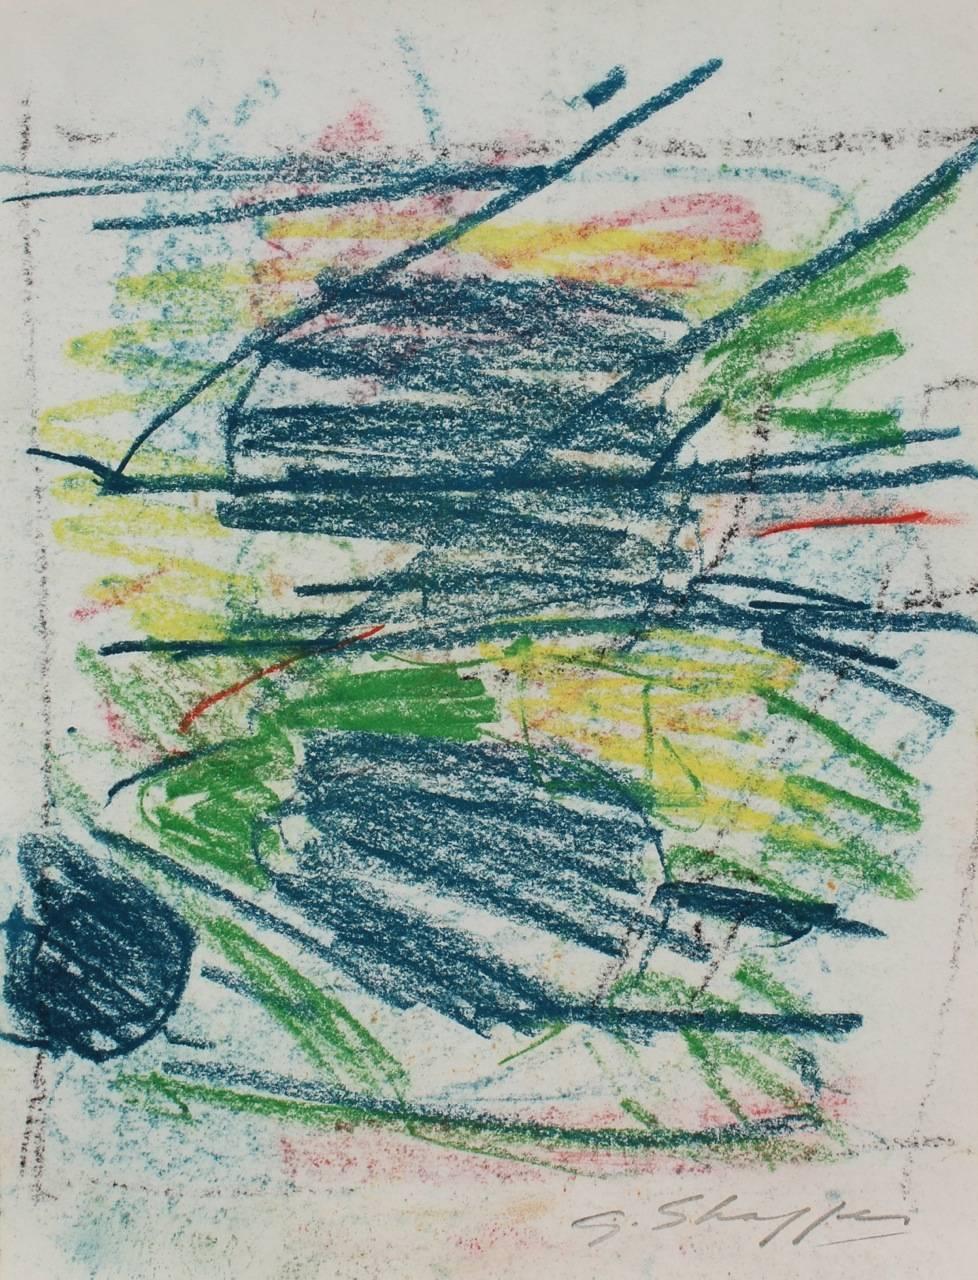 Gary Lee Shaffer Abstract Drawing - Abstract Expressionist Study in Blue and Green, Pastel on Paper, 1962